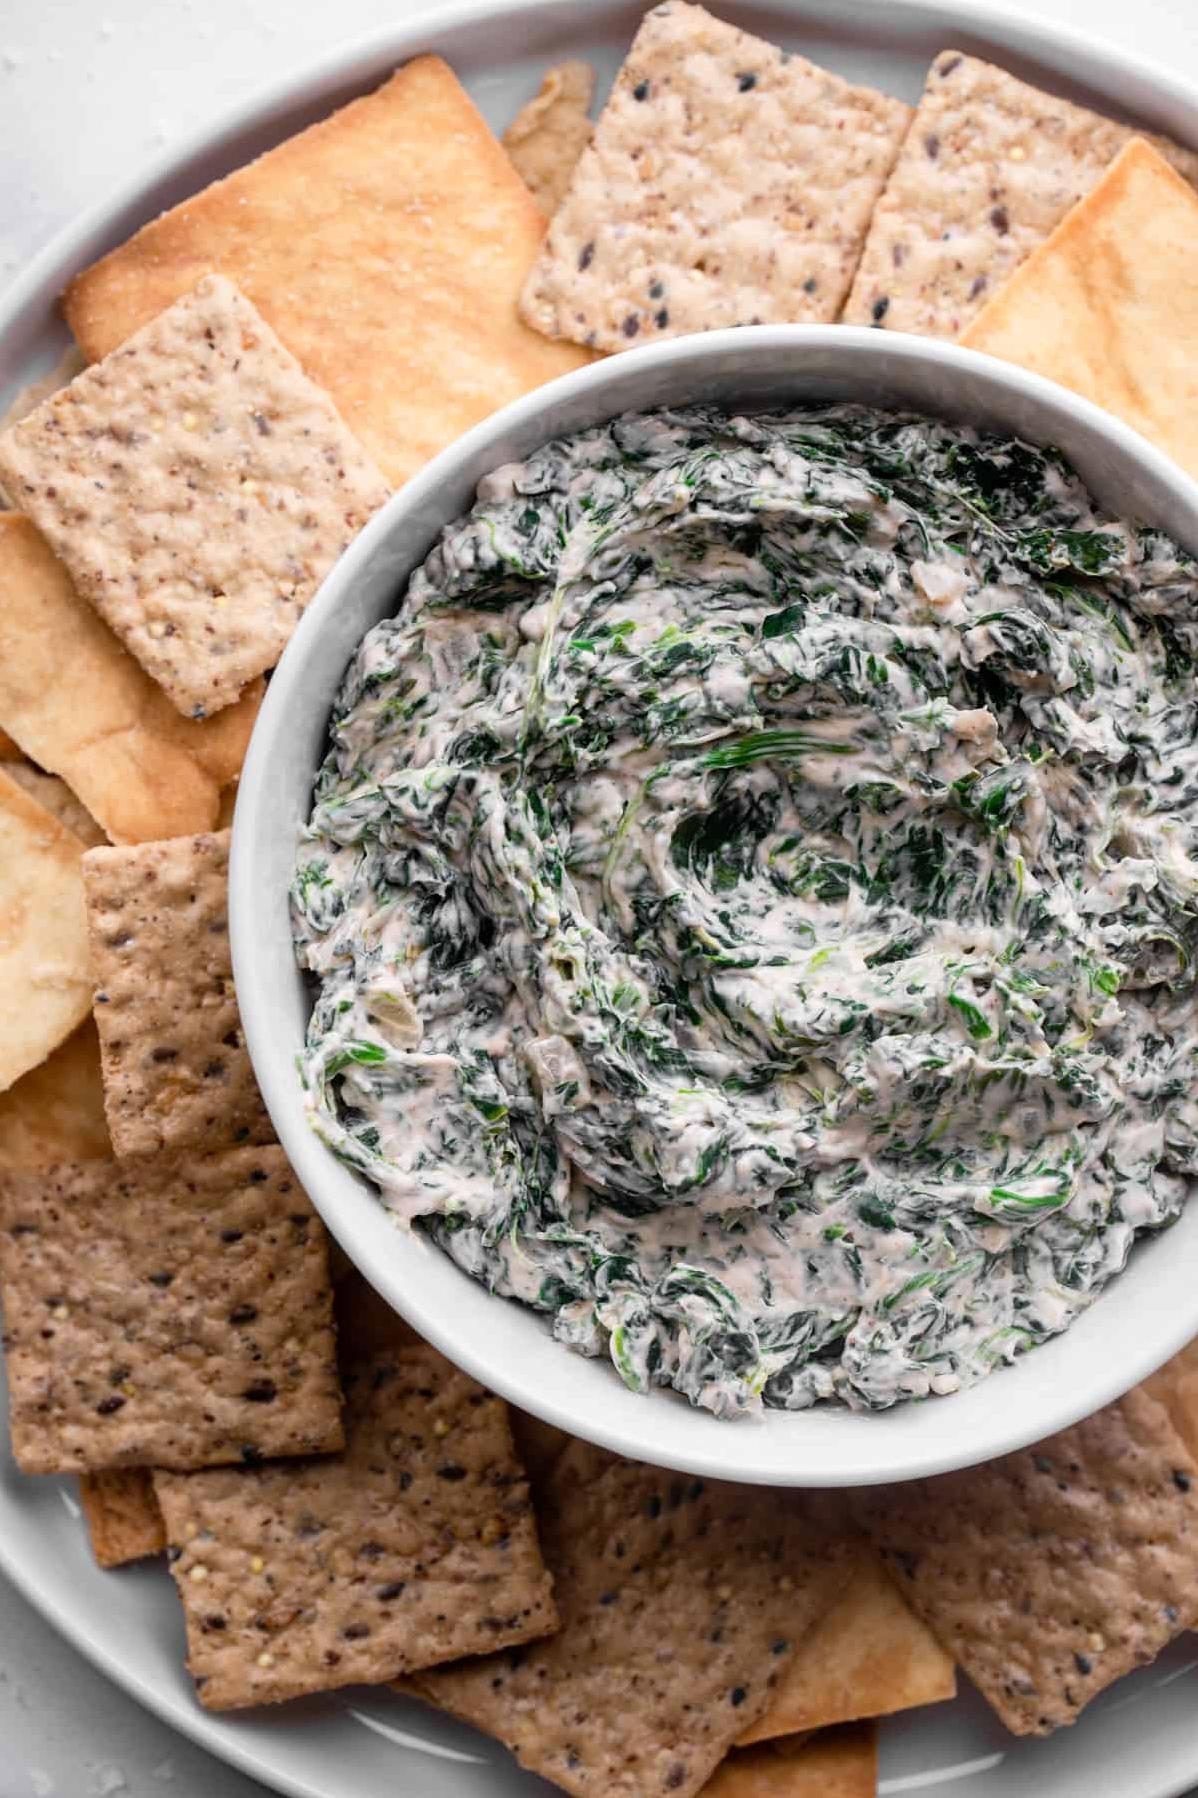  A creamy, dreamy dip that's perfect for any occasion.